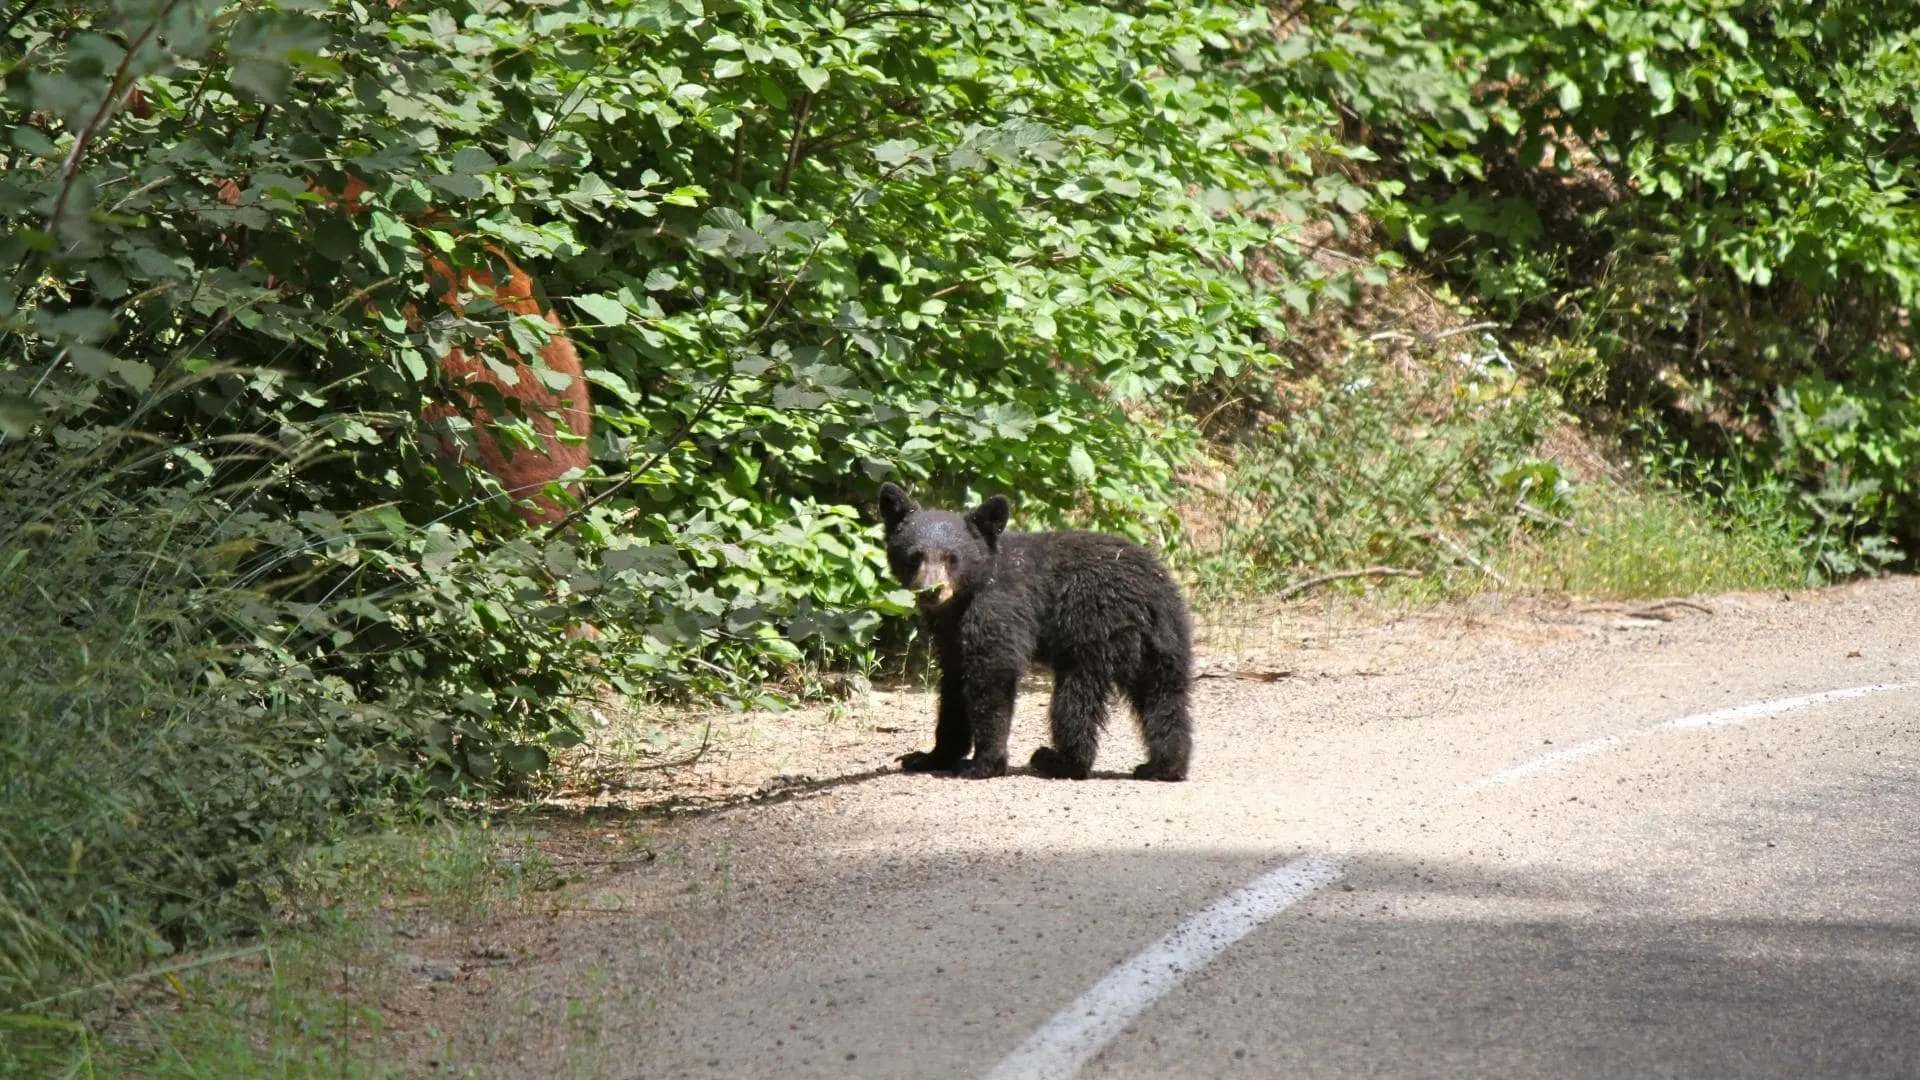 Photo of a small bear cub in Yosemite National Park - wildlife to be aware of when Yosemite RV camping.